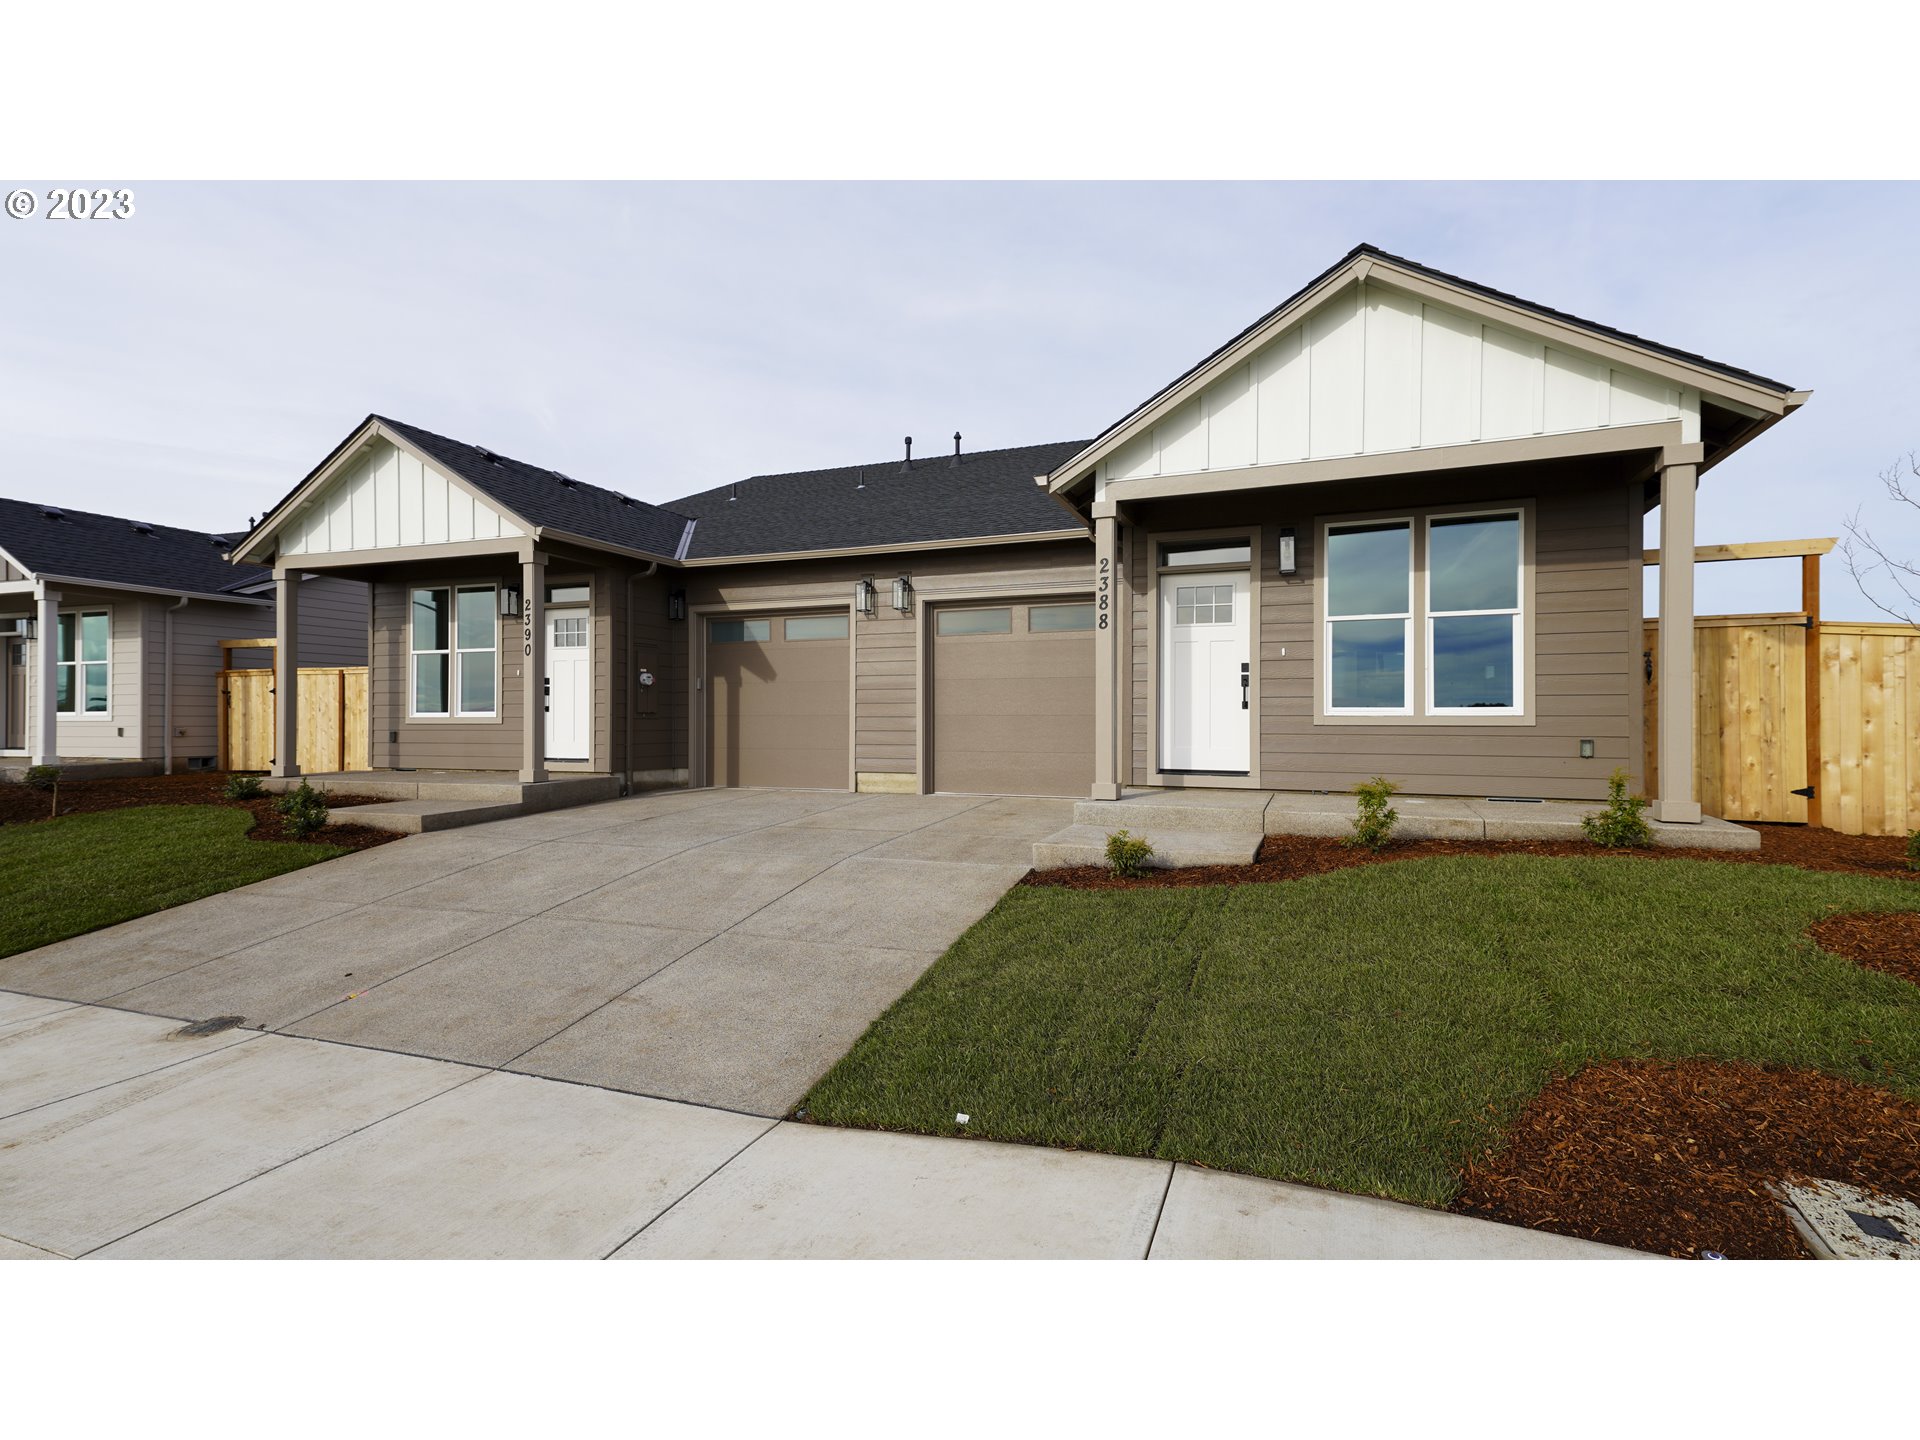 2390 W 8th AVE, Junction City, OR 